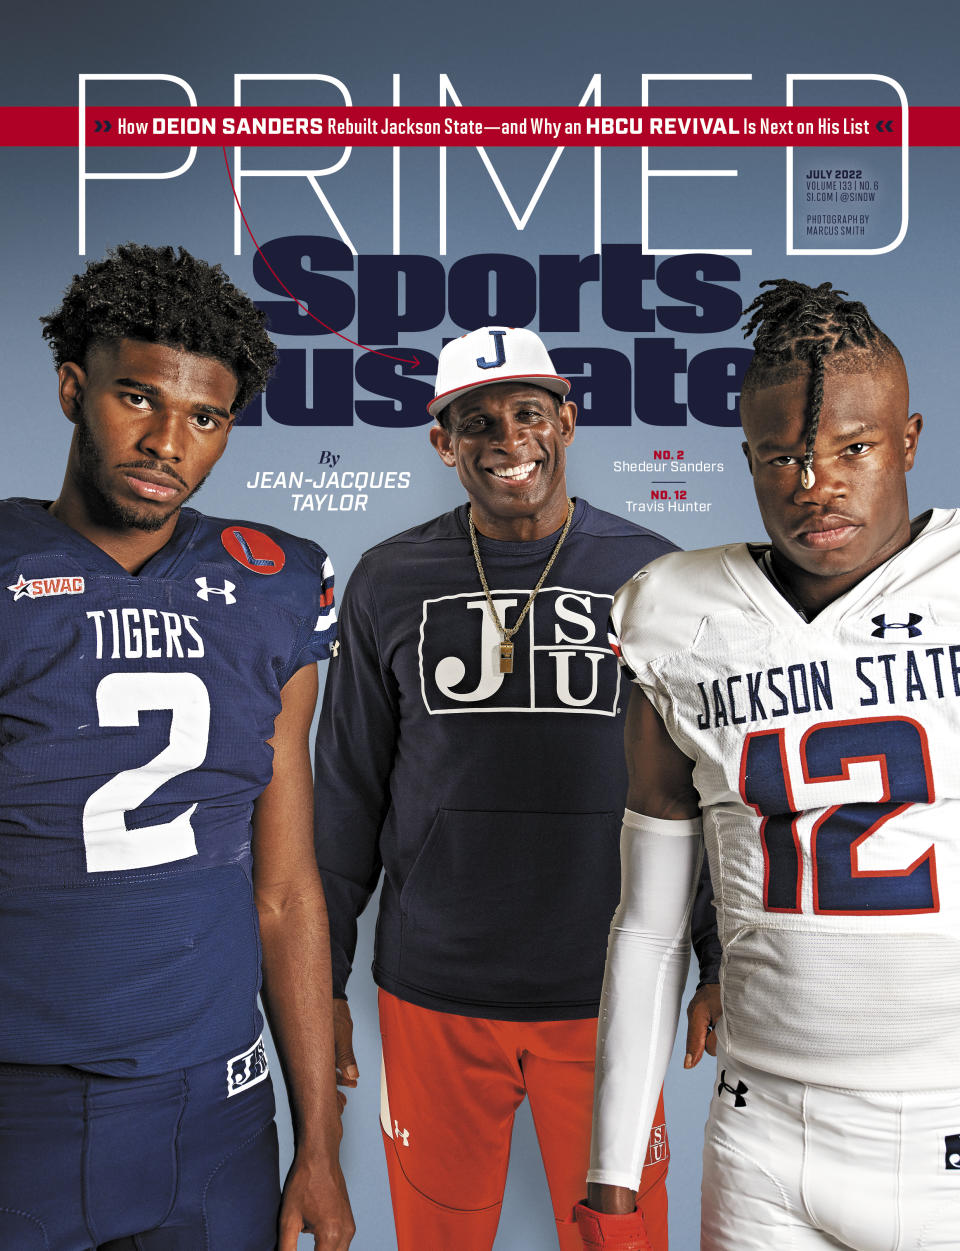 Portrait of Jackson State University head football coach Deion Sanders (C) with (L-R) Travis Hunter and Shedeur Sanders during a photo shoot at Natural Light Studio Dallas. - Credit: Marcus Smith/Sports Illustrated via Getty Images